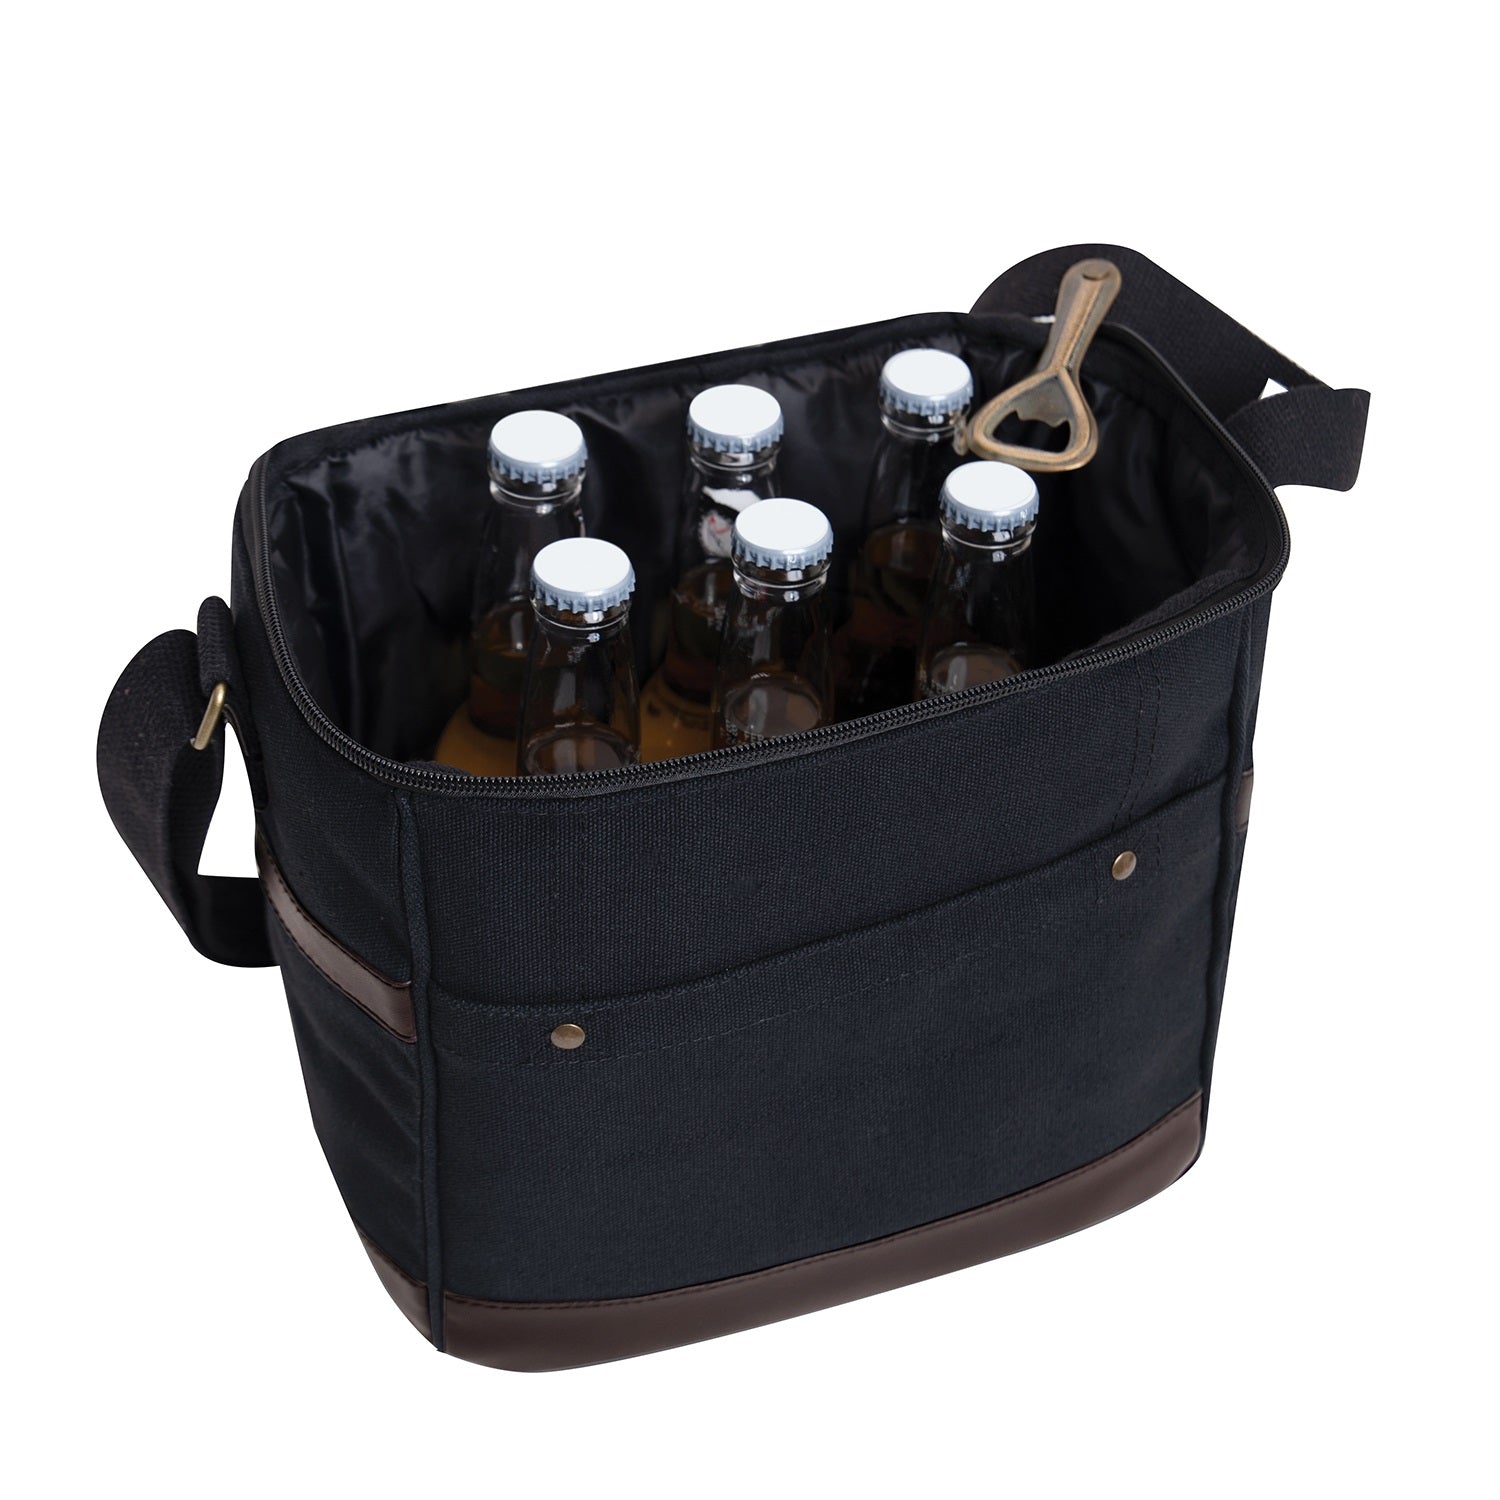 Rothco Canvas Insulated Cooler Bag Black